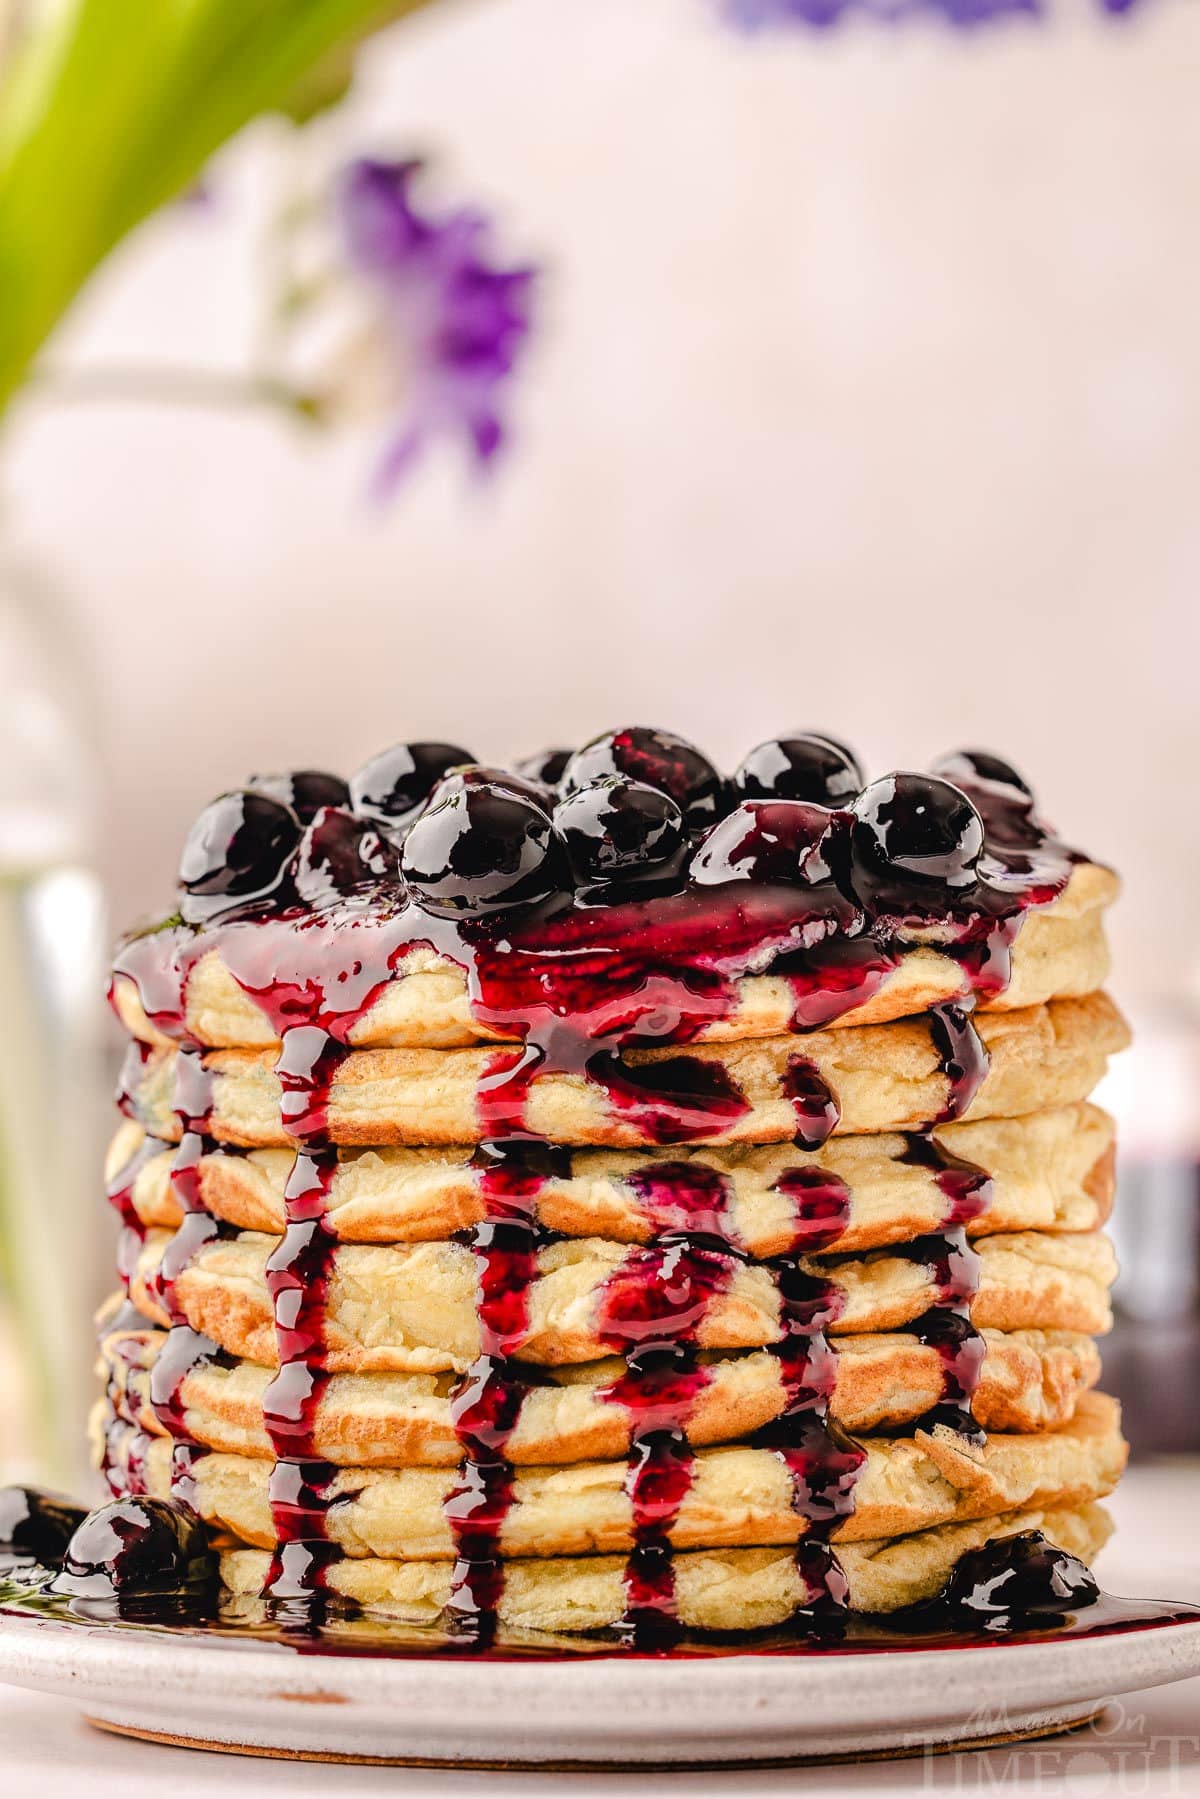 lemon ricotta waffles stacked high on a white round plate and topped with a glistening homemade blueberry sauce. fresh flowers can be seen in the background.